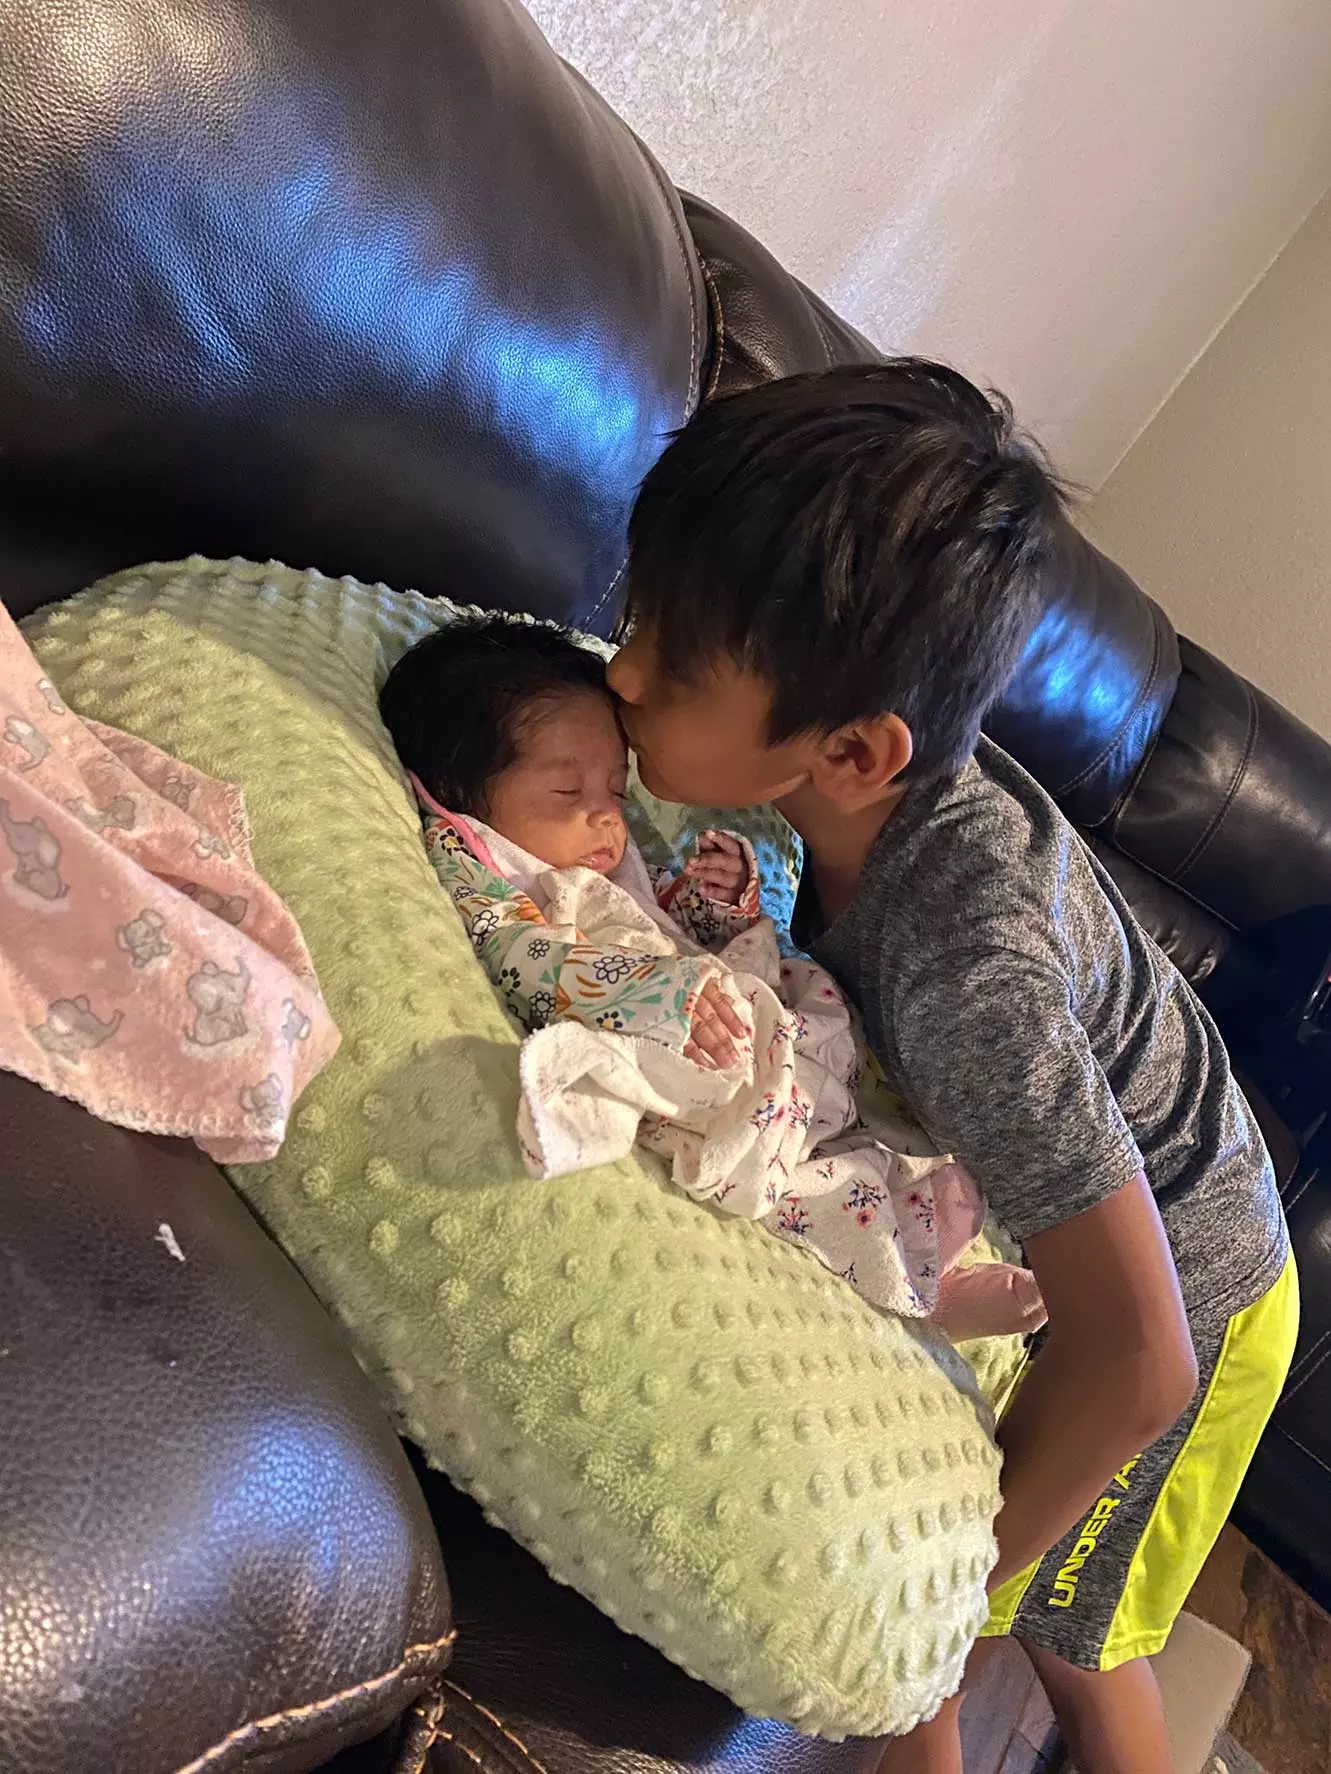 A brother kissing his baby sister